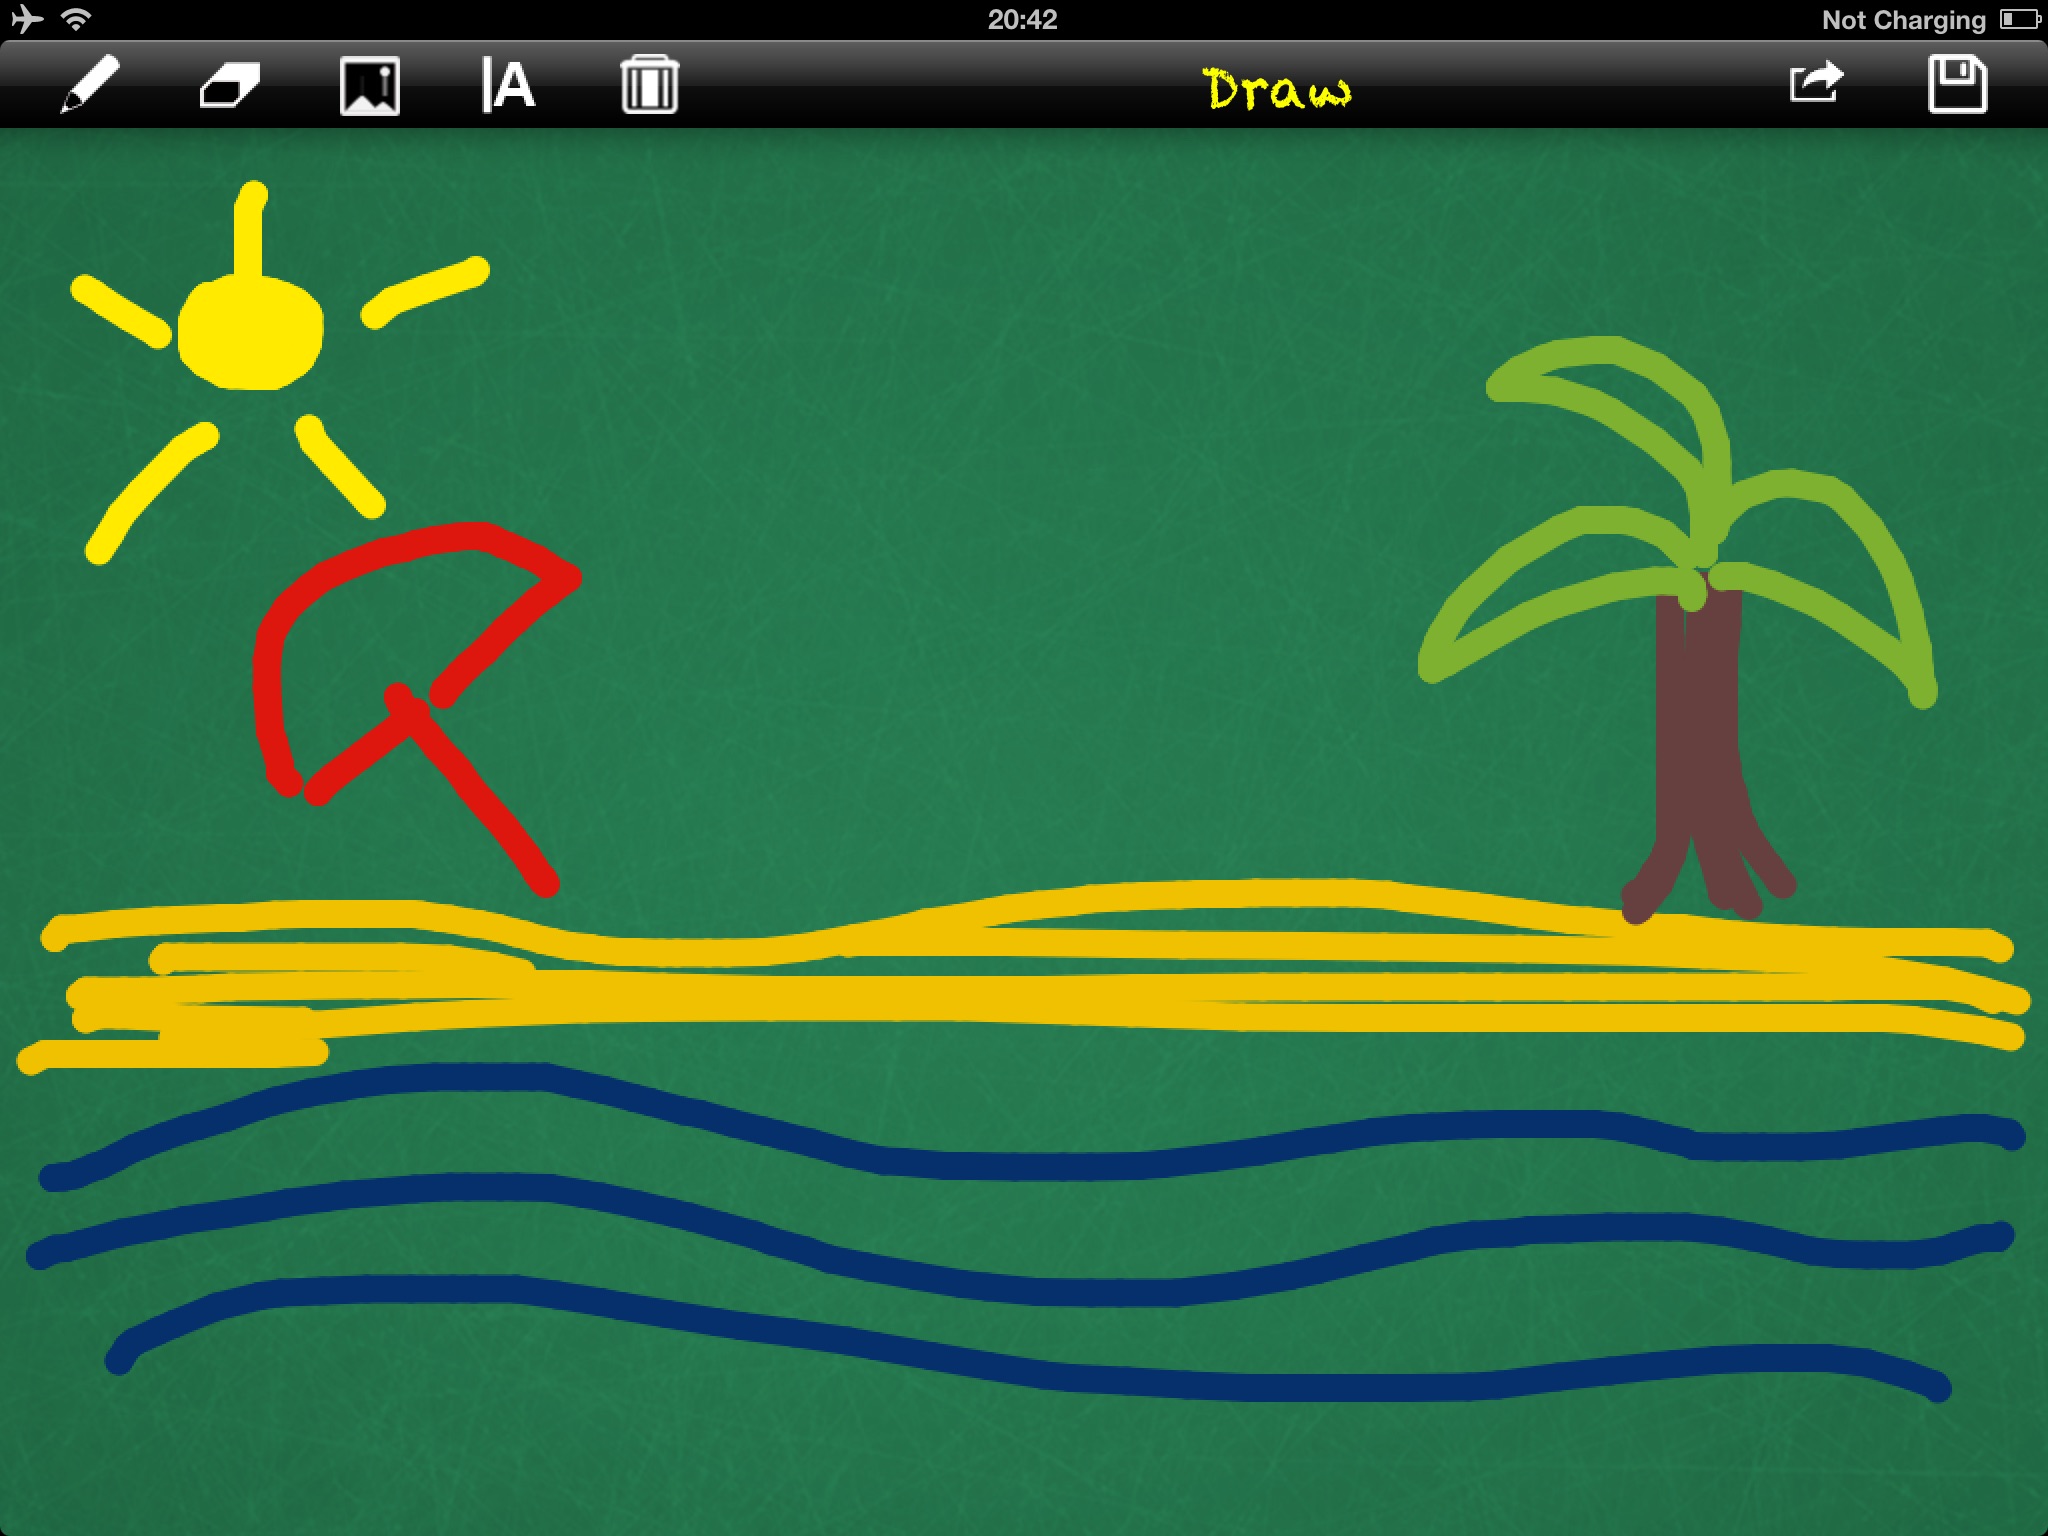 Draw for iPad with fingers screenshot 2